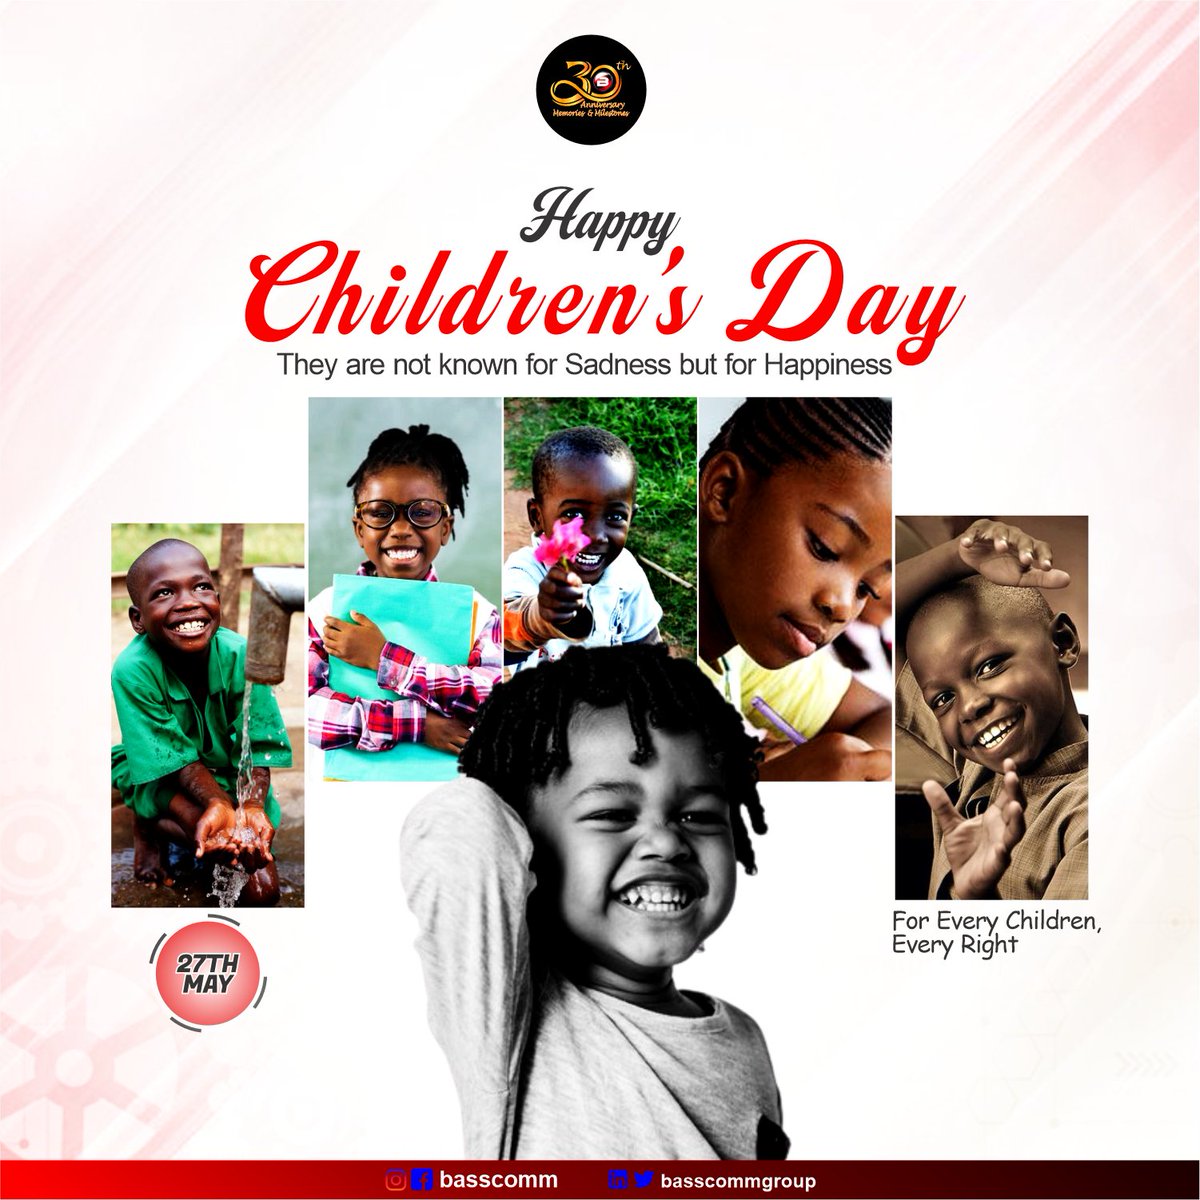 To all the stars who fill our world with laughter and hopes, happy Children's Day! 

Your purity and fascination serve as a reminder of life's beauty. Never stop discovering and keep shining. 

Happy Children’s Day!

#BASSCOMM
#children
#childrensday
#basscommnigeria